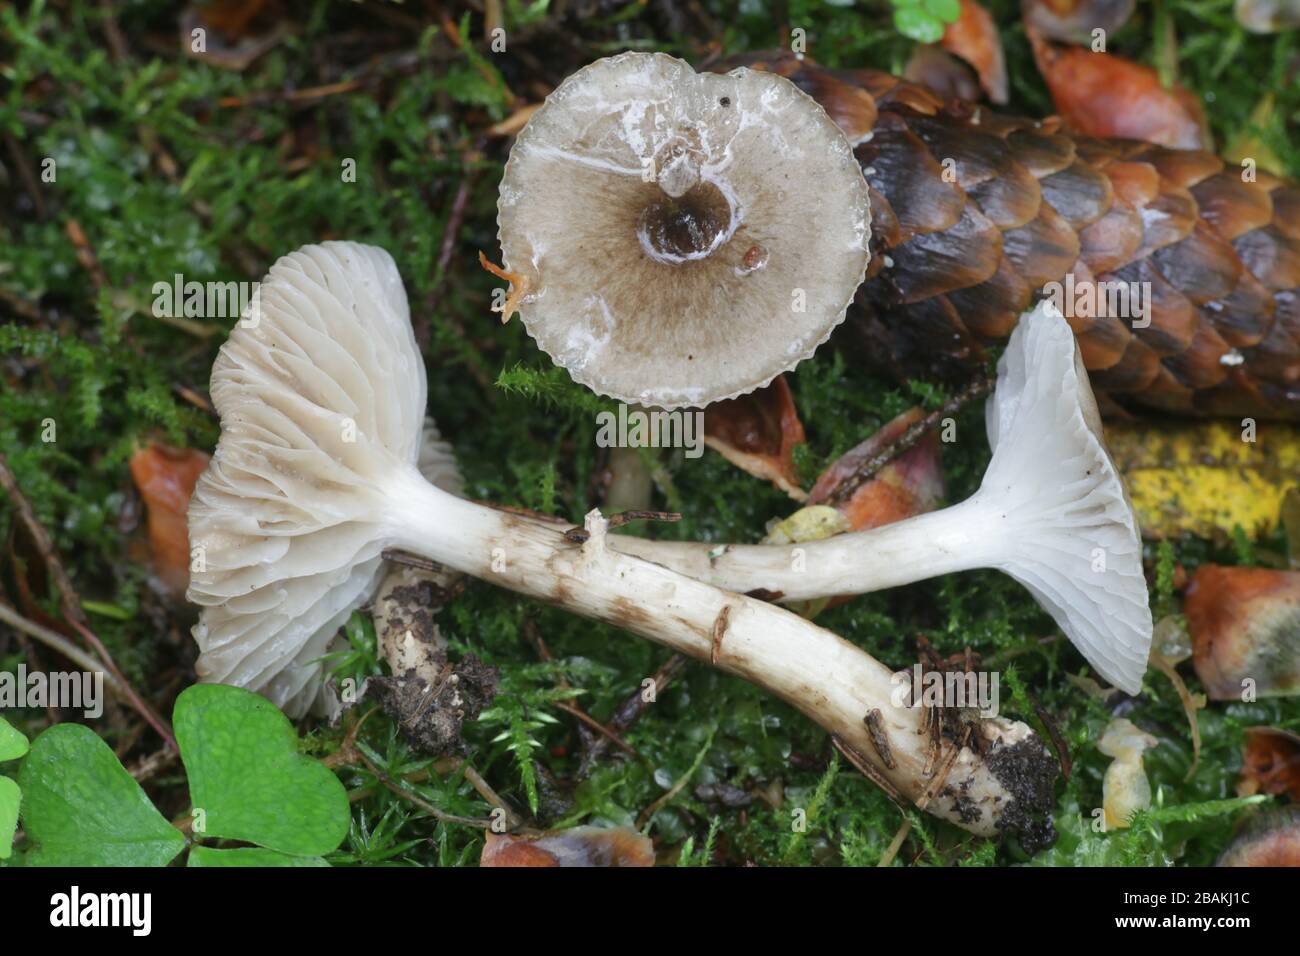 Hygrophorus olivaceoalbus, known as the olive wax cap, mushrooms from Finland Stock Photo